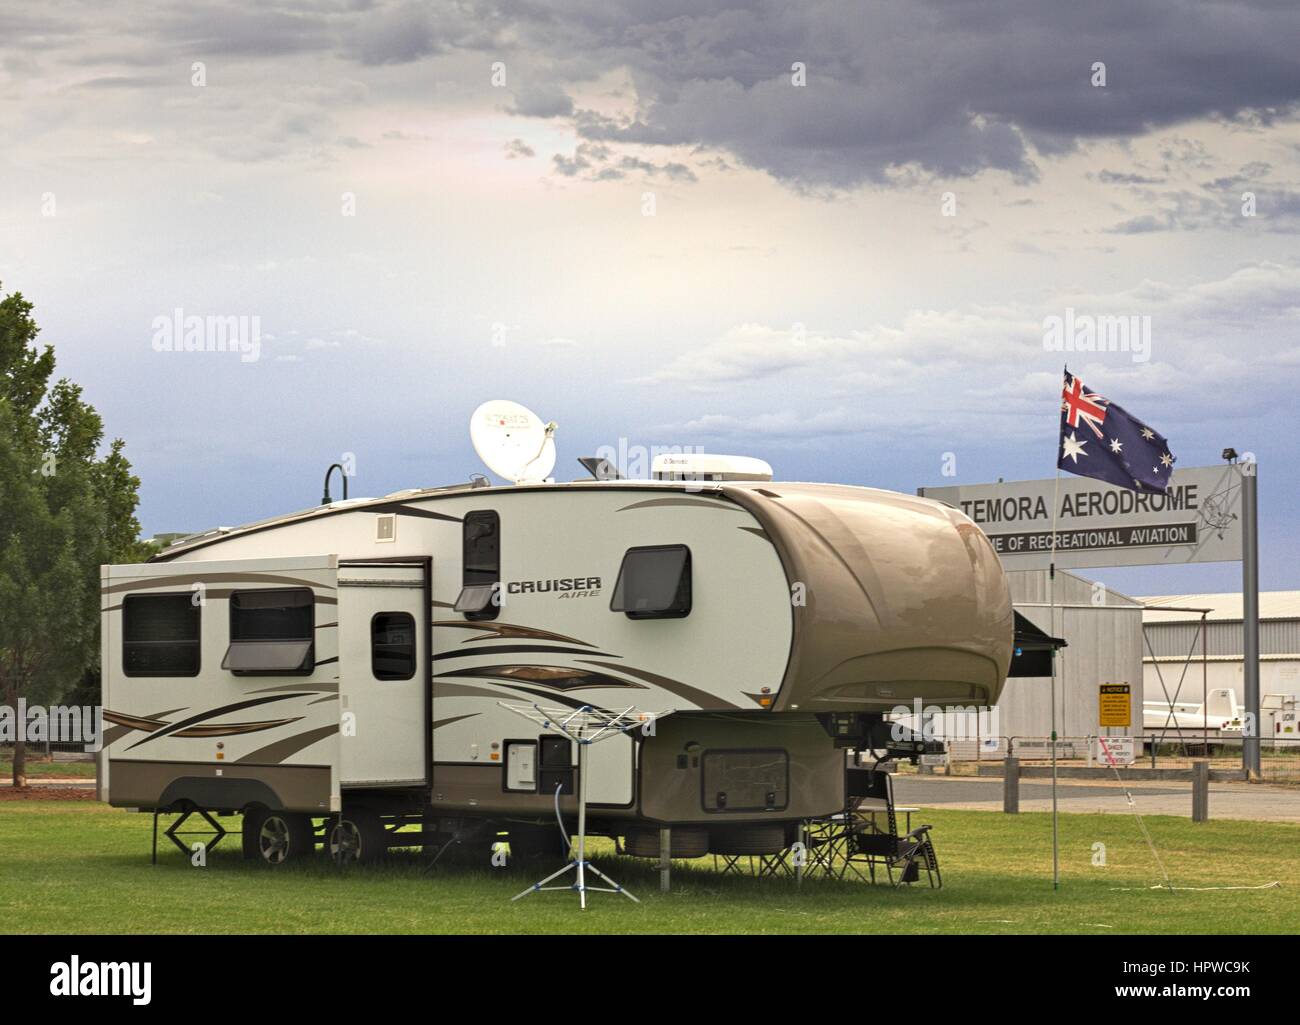 Large cruiser caravan parked in Temora campground, beside the aerodrome, Australian flag flying in the background. Stock Photo